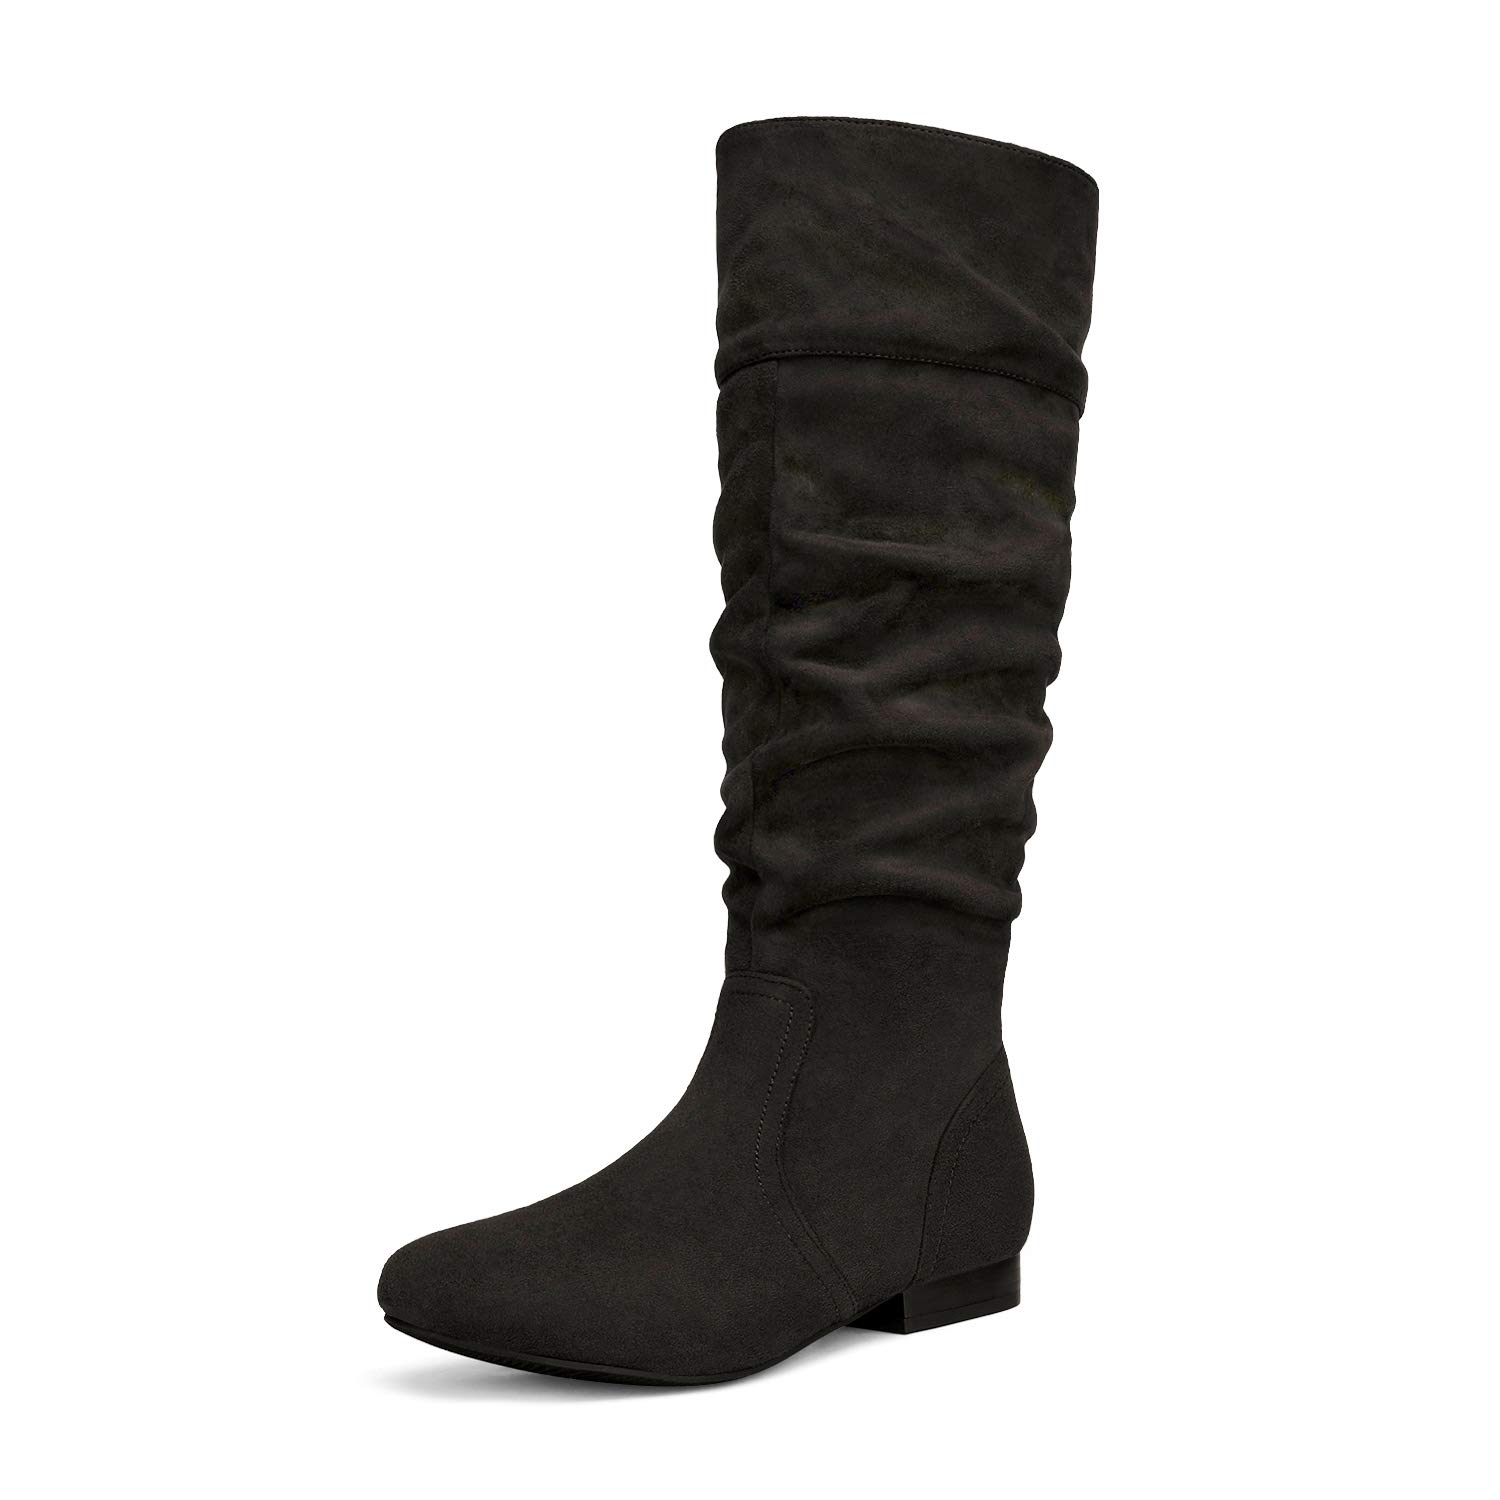 DREAM PAIRS Women's Knee High Pull On Fall Weather Winter Boots